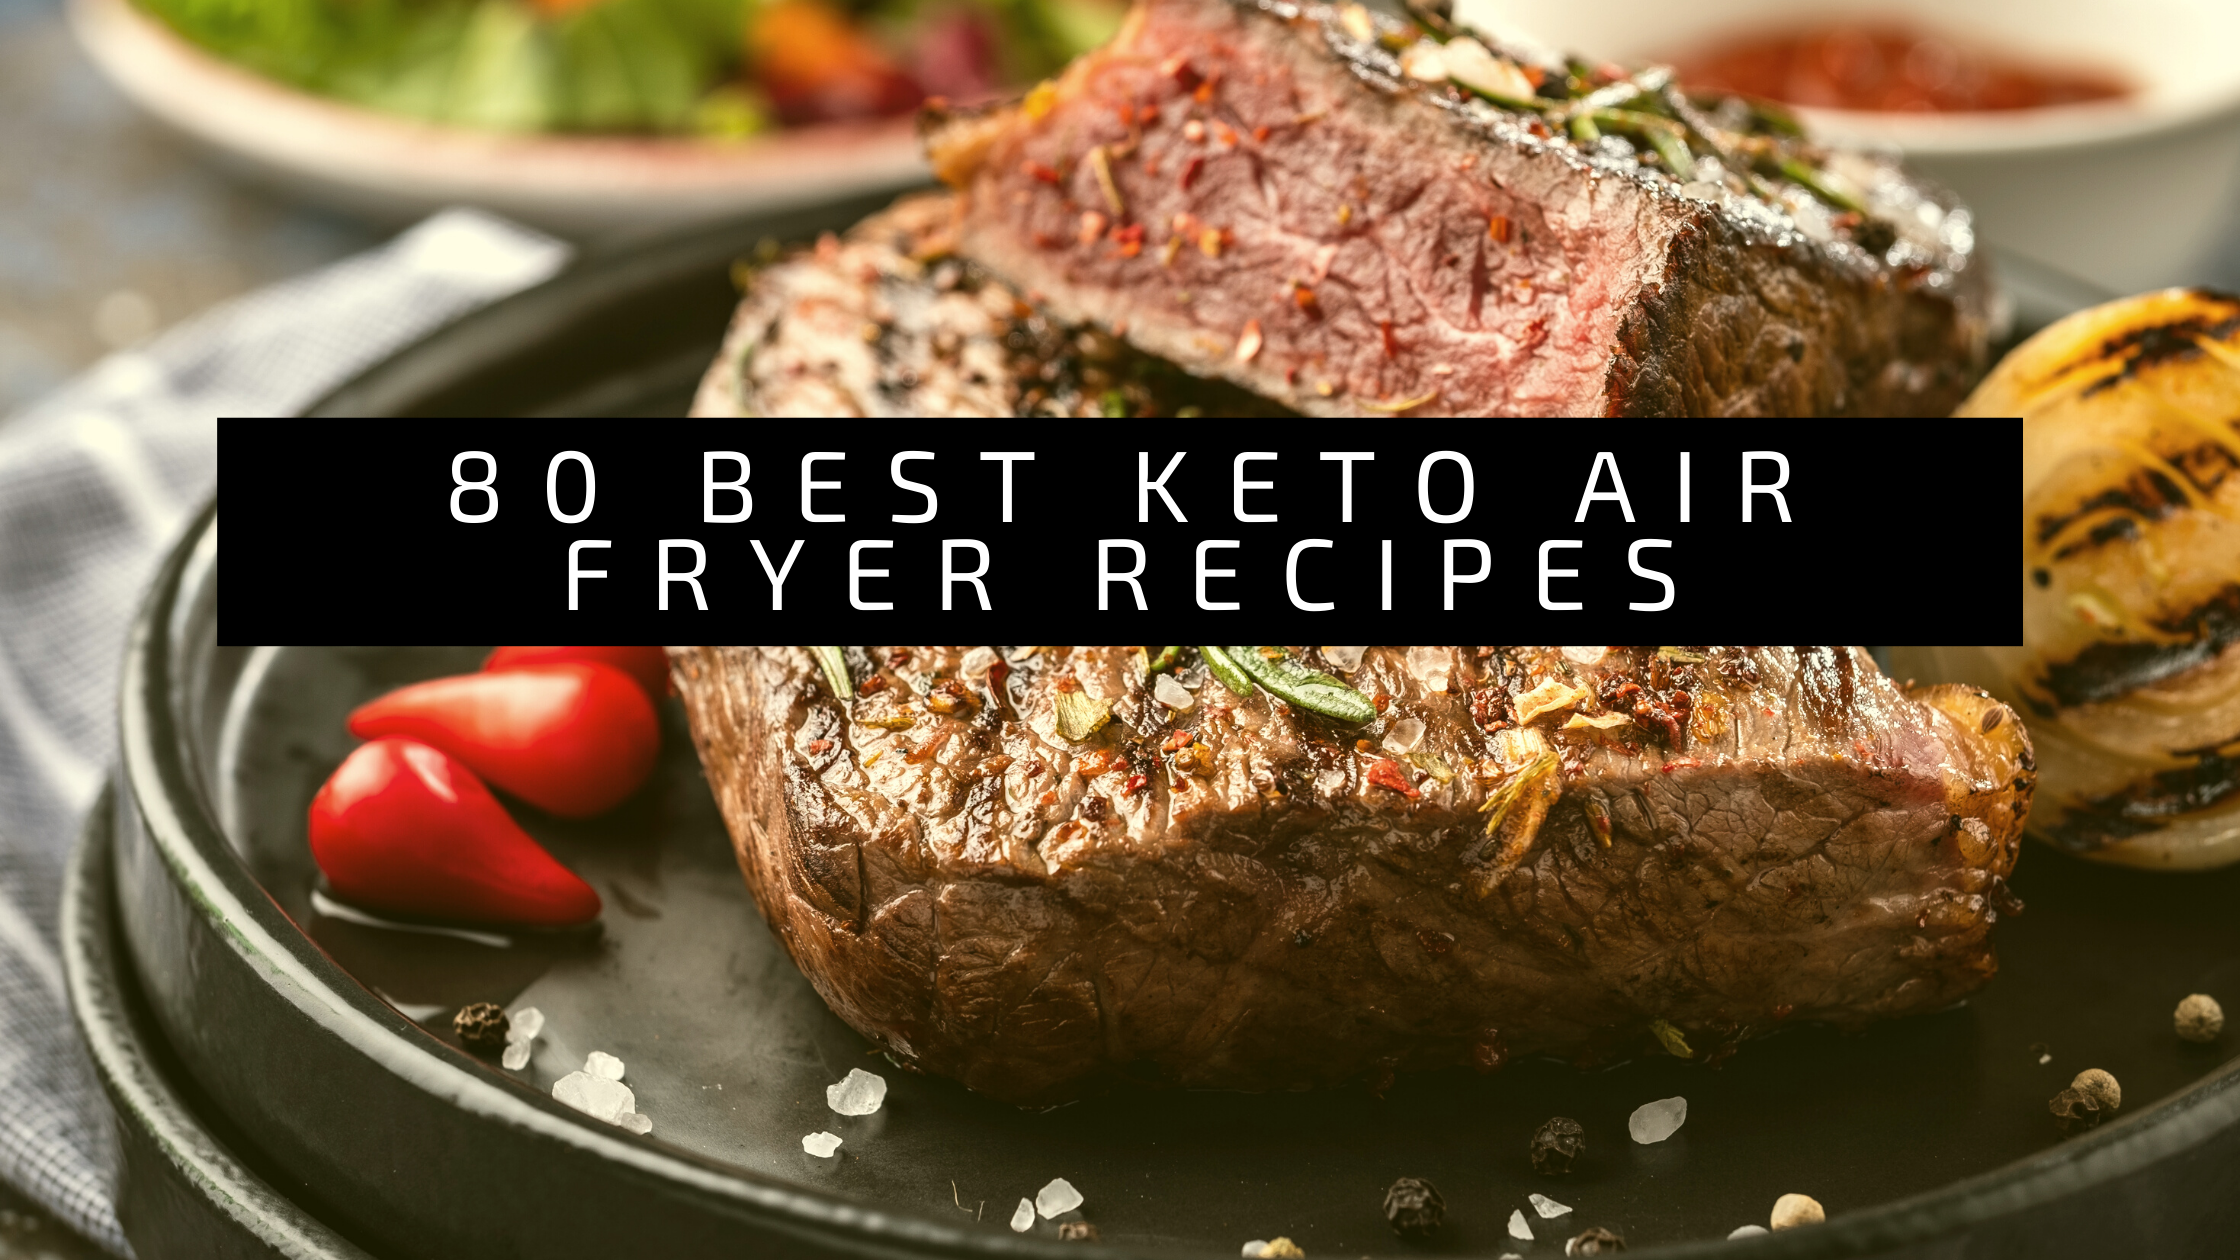 40 Family-Friendly Keto Air Fryer Recipes for Quick and Delicious Meals 15